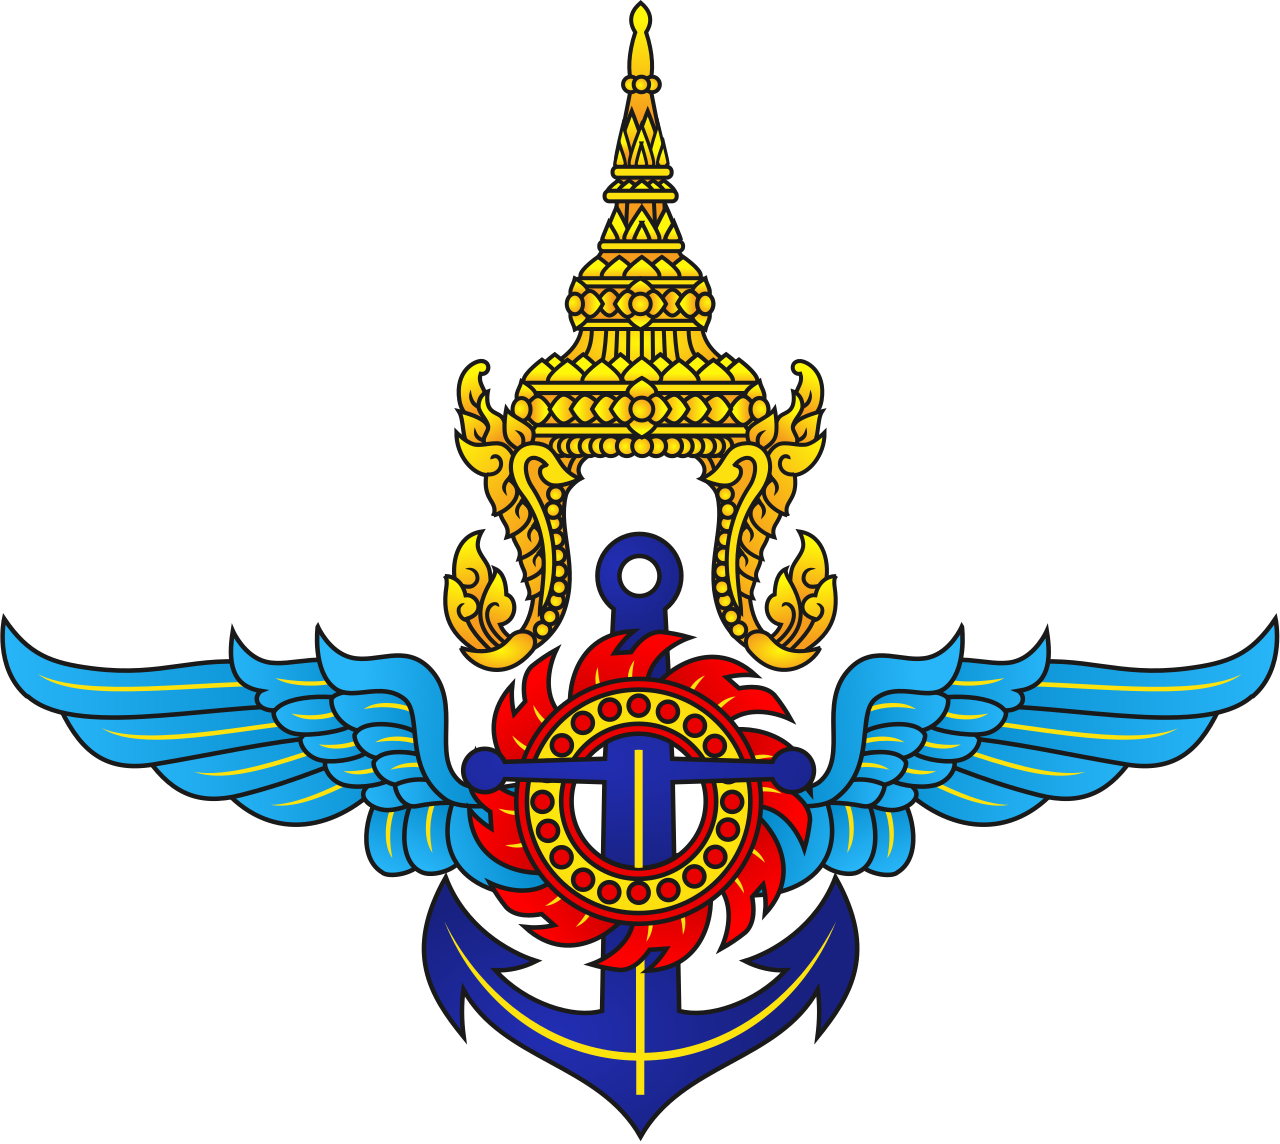 1280px-Emblem_of_the_Ministry_of_Defence_of_Thailand.svg.png